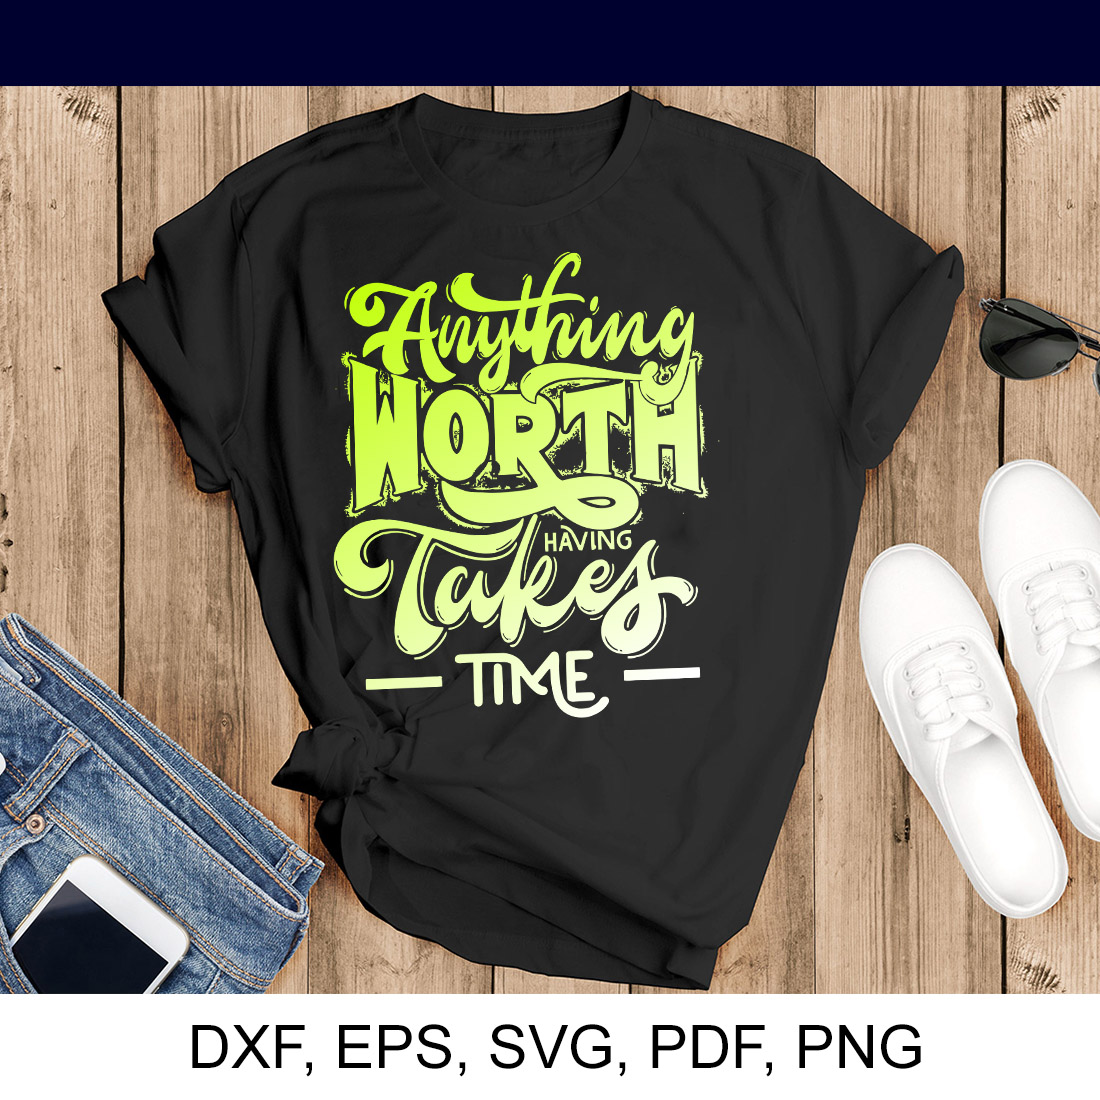 Anything worth having takes time 8 SVG Bundle t-shirt design preview image.